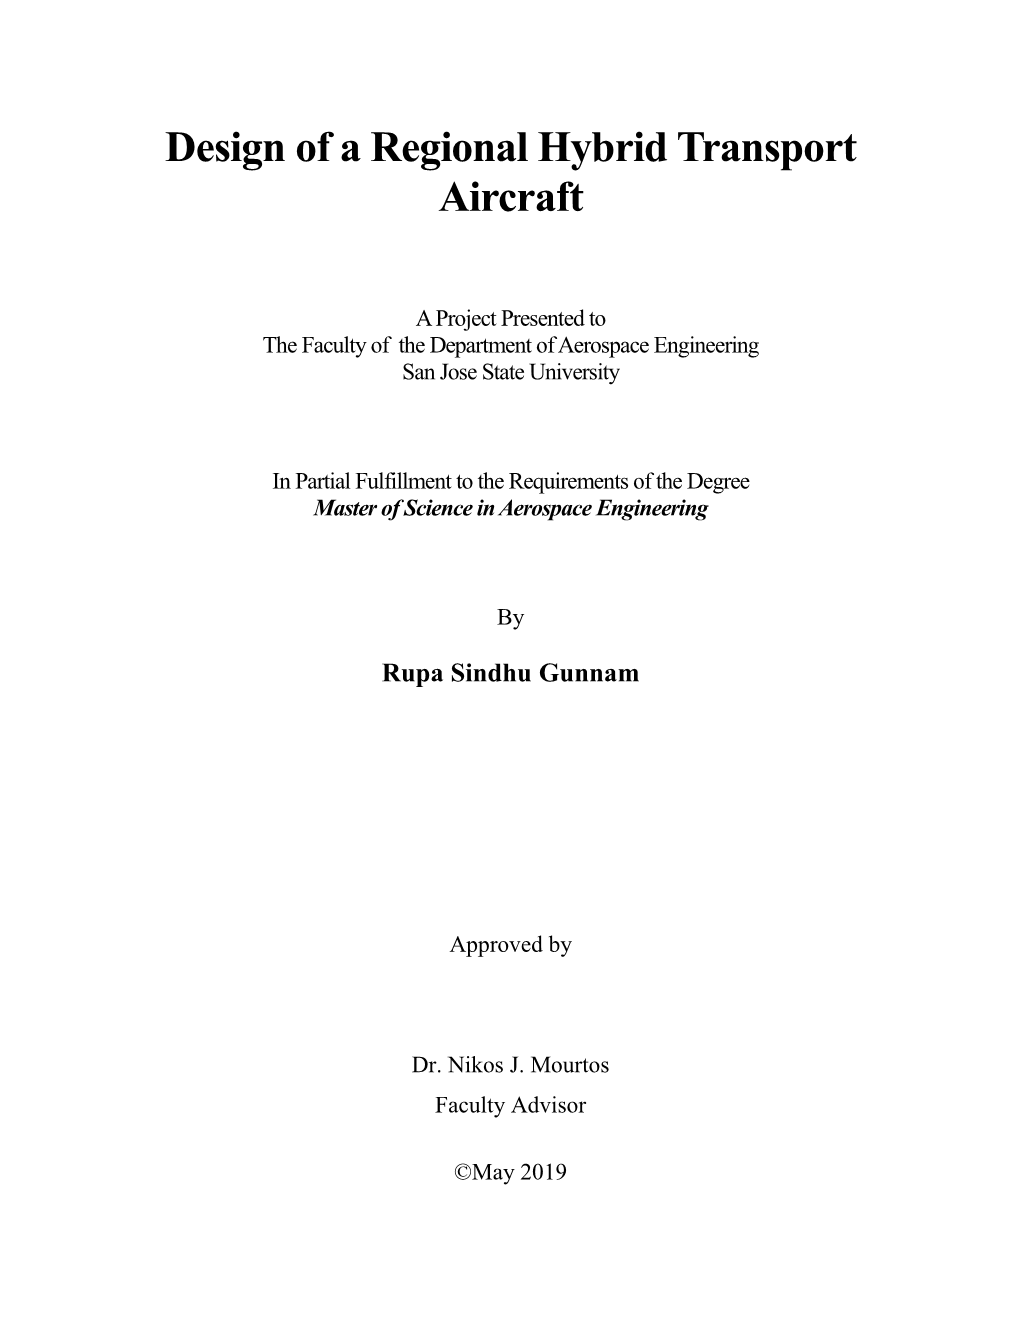 Hybrid-Electric Turboprop Aircraft RUP-27N As an Alternative to Conventional Gasoline Turboprop Aircraft